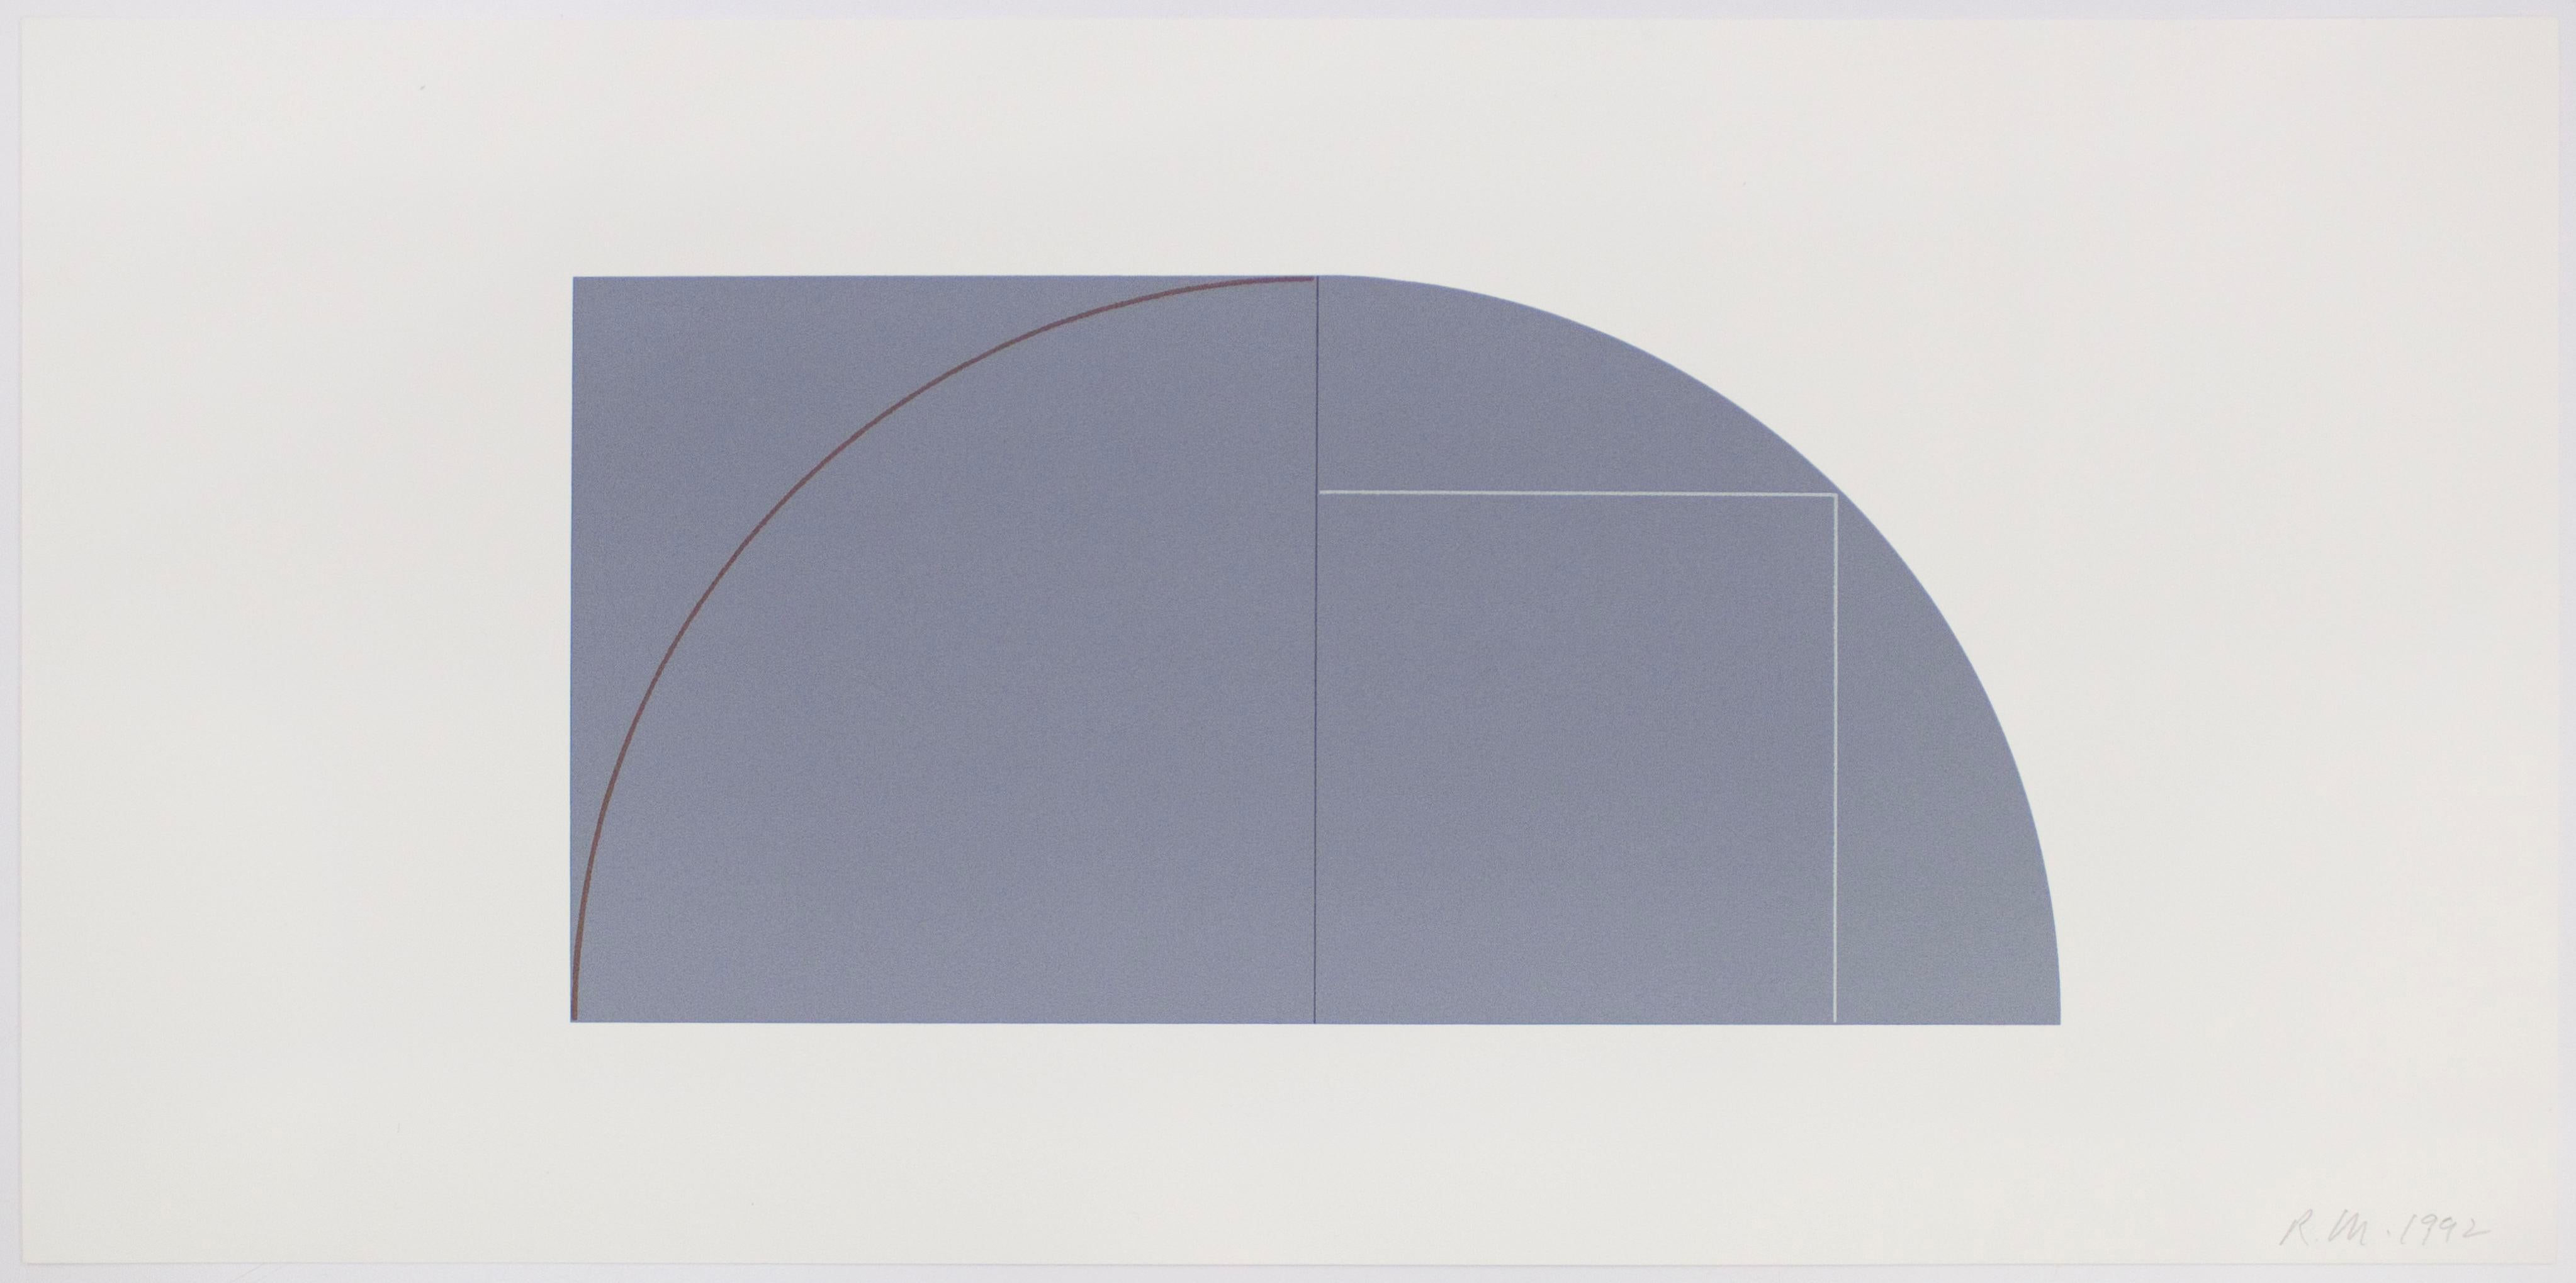 Associated with the Minimalist art movement of the 1960s, Mangold developed a reductive vocabulary based on geometric forms, monochromatic color, and an emphasis on the flatness of the painted picture plane. Within this seemingly austere repertoire,